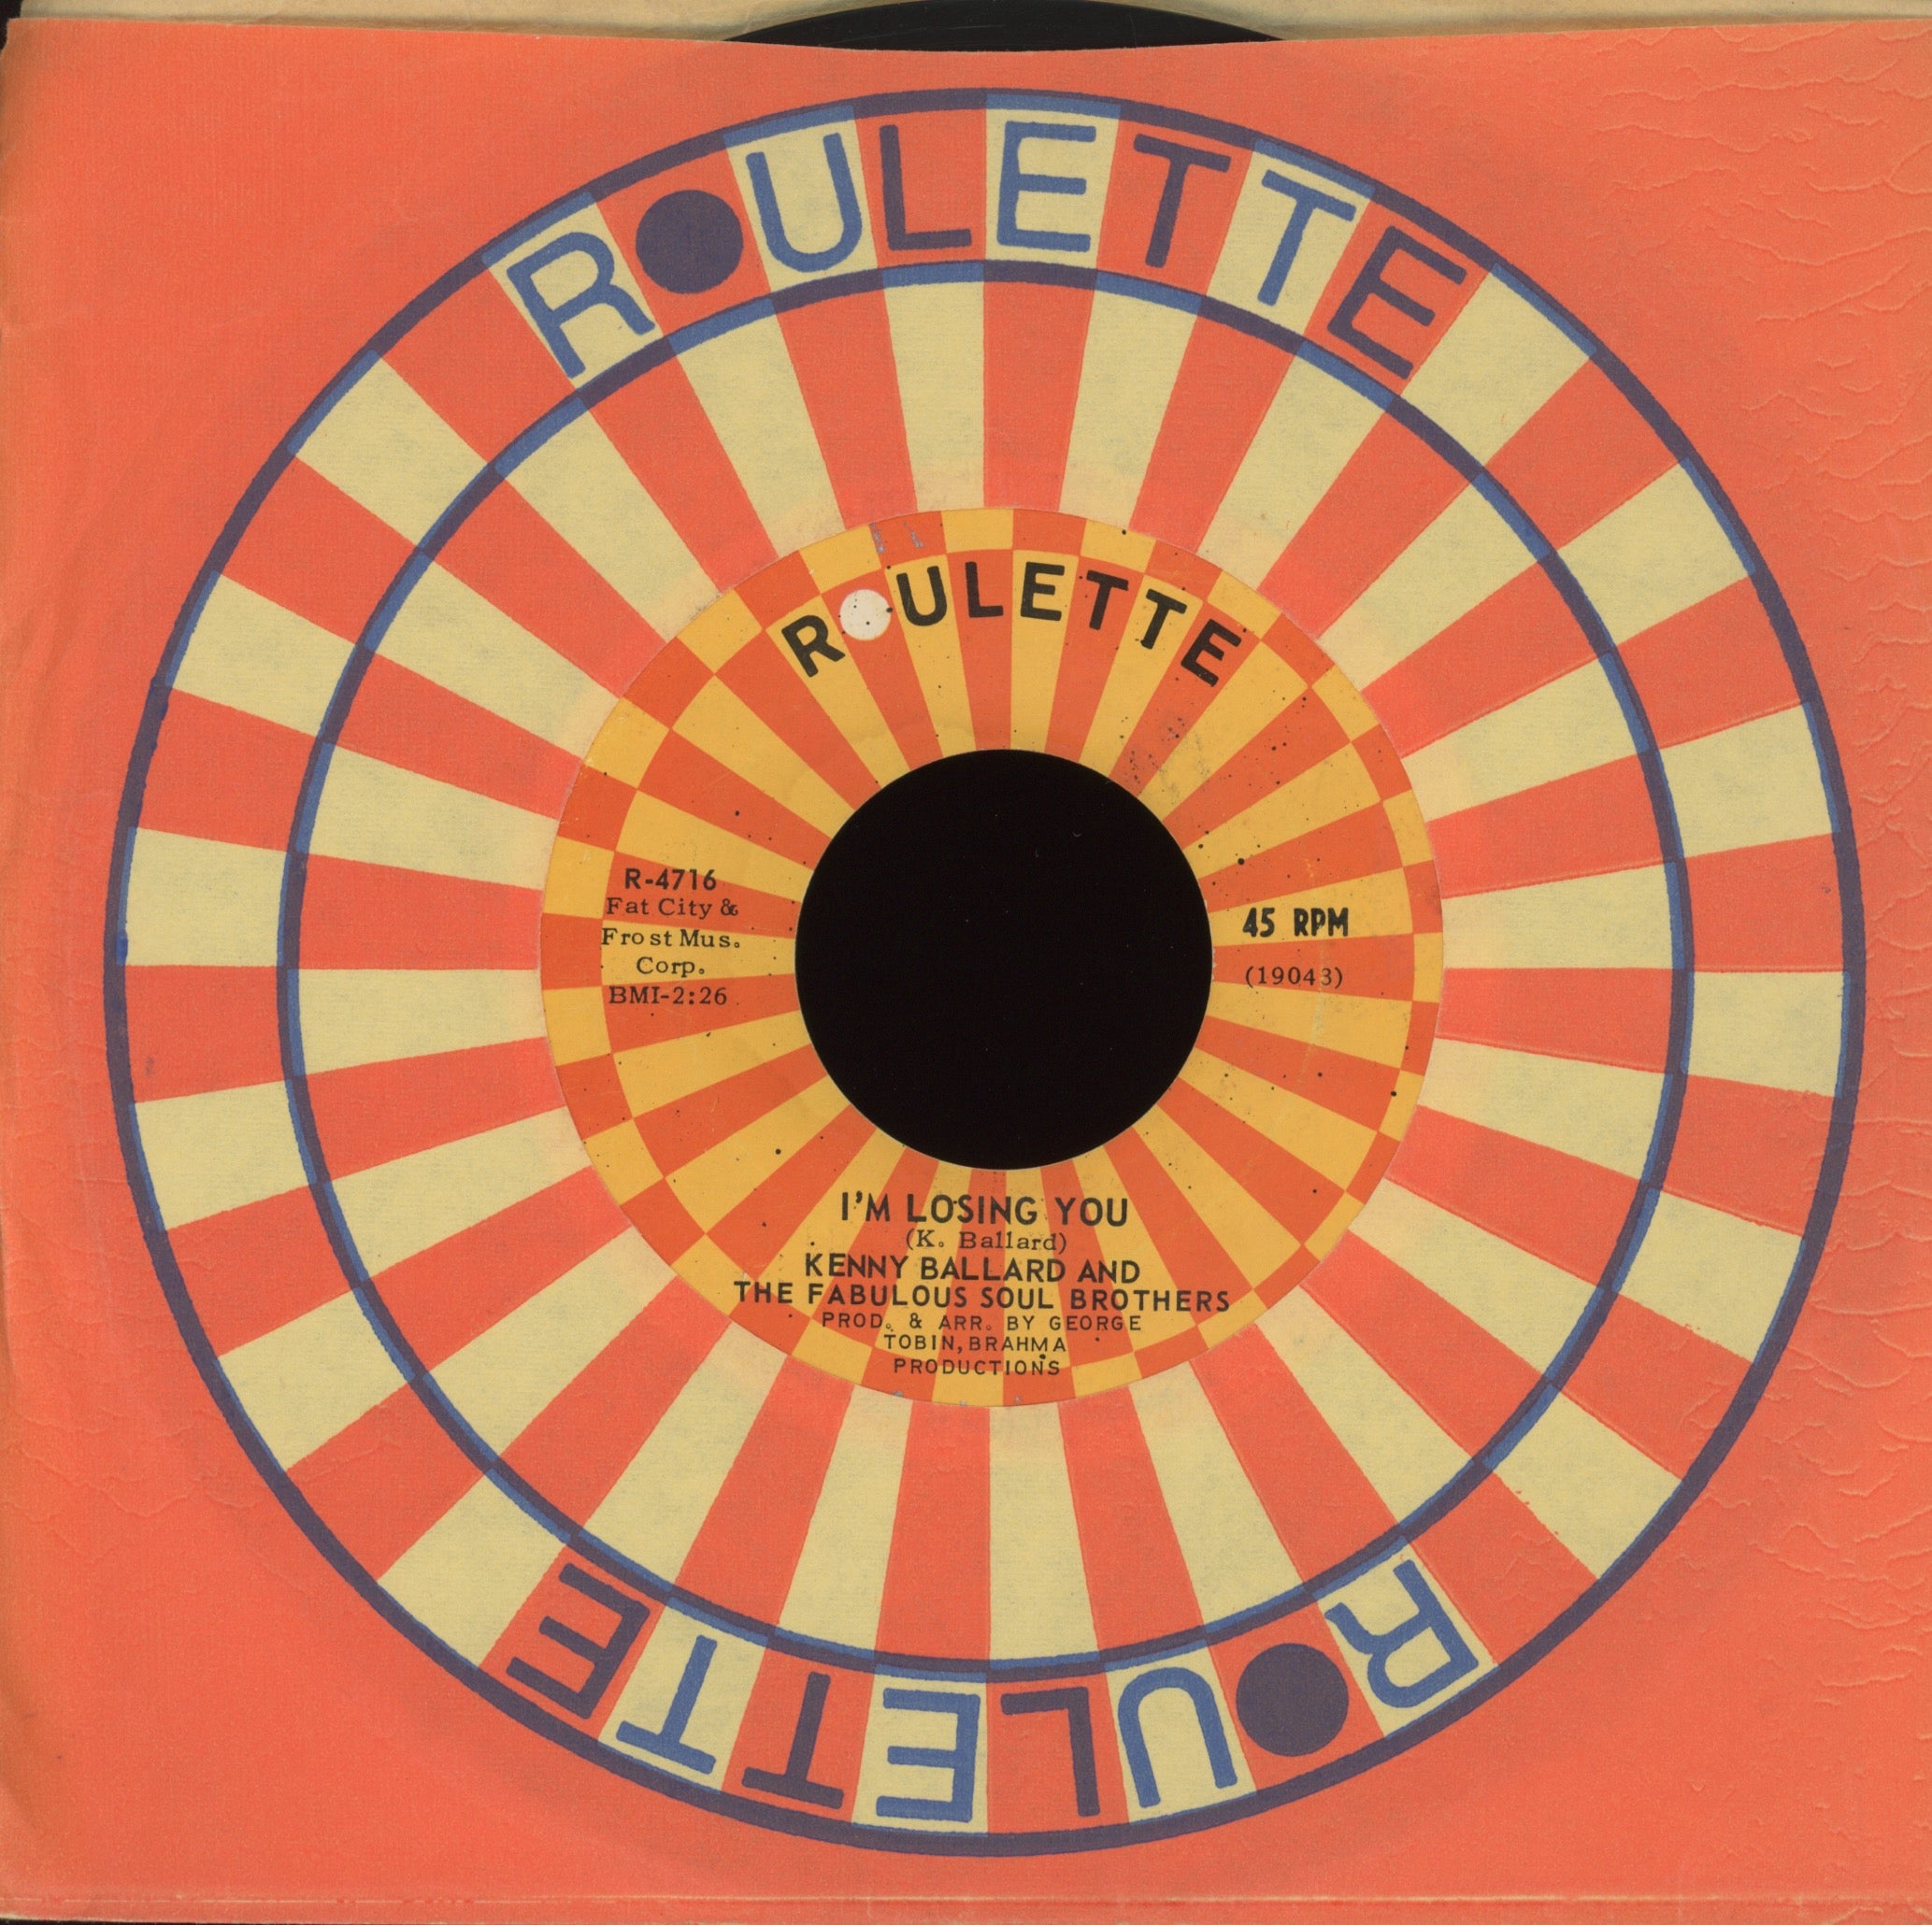 Kenny Ballard & The Fabulous Soul Brothers - I'm Losing You on Roulette Northern Soul 45